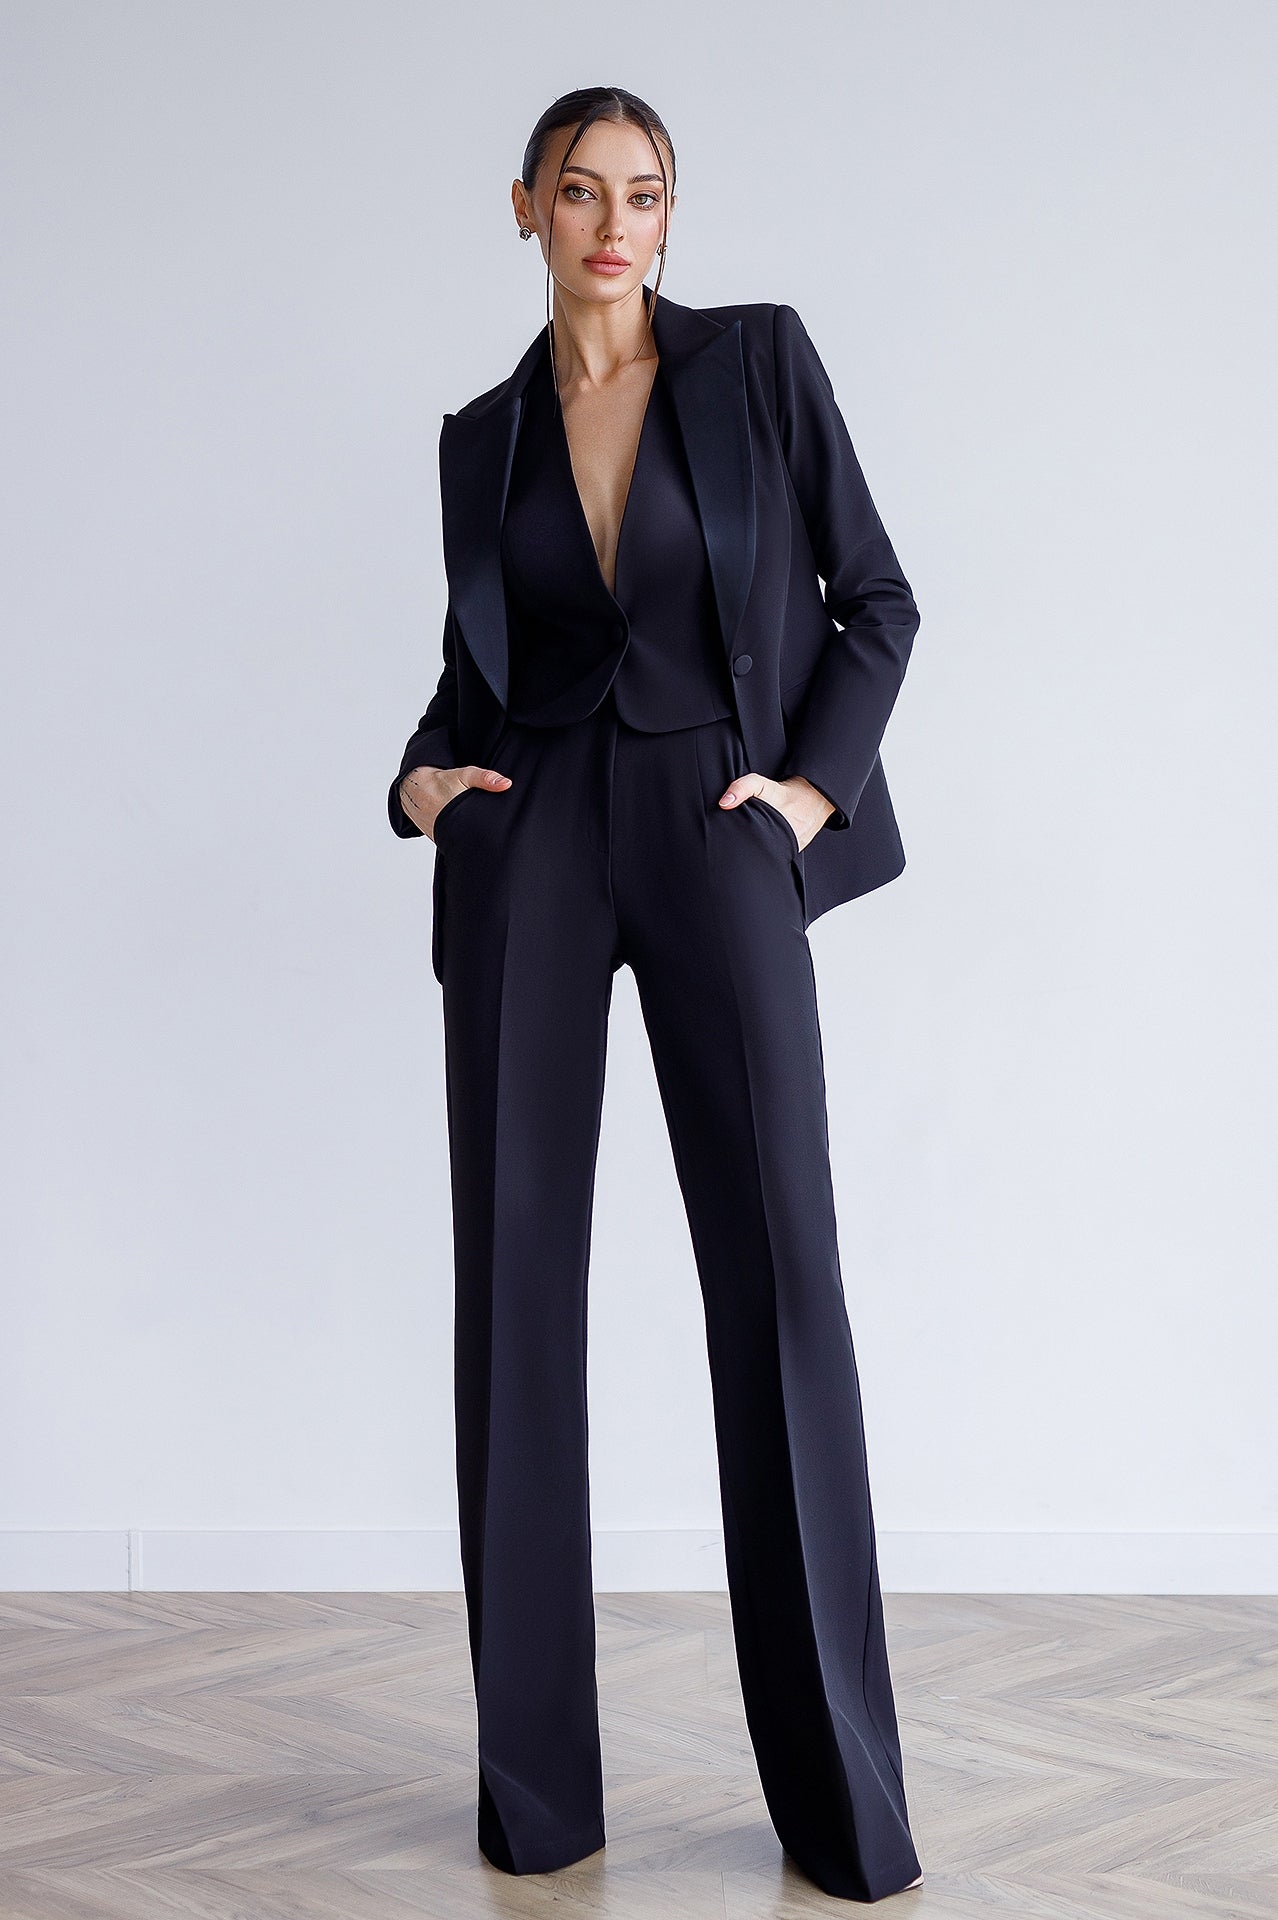 Black Single-Breasted Suit 3-Piece